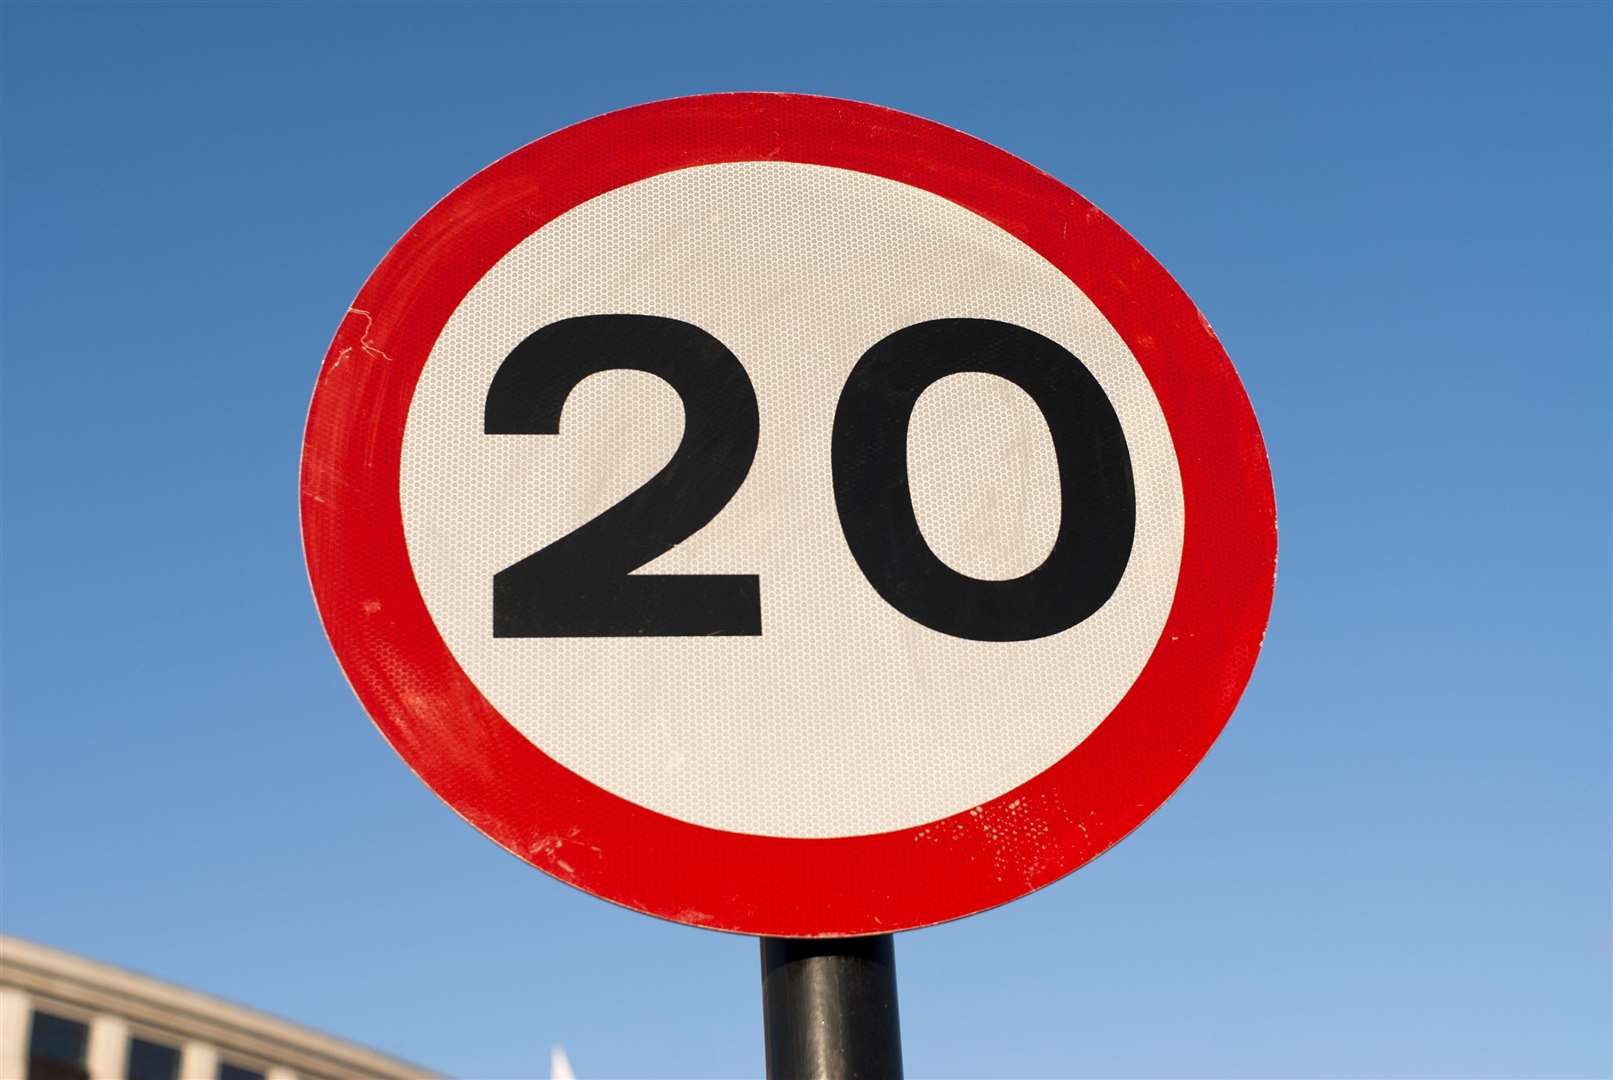 Under the plan, more areas in the Highlands would have 20mph speed limits in built-up areas